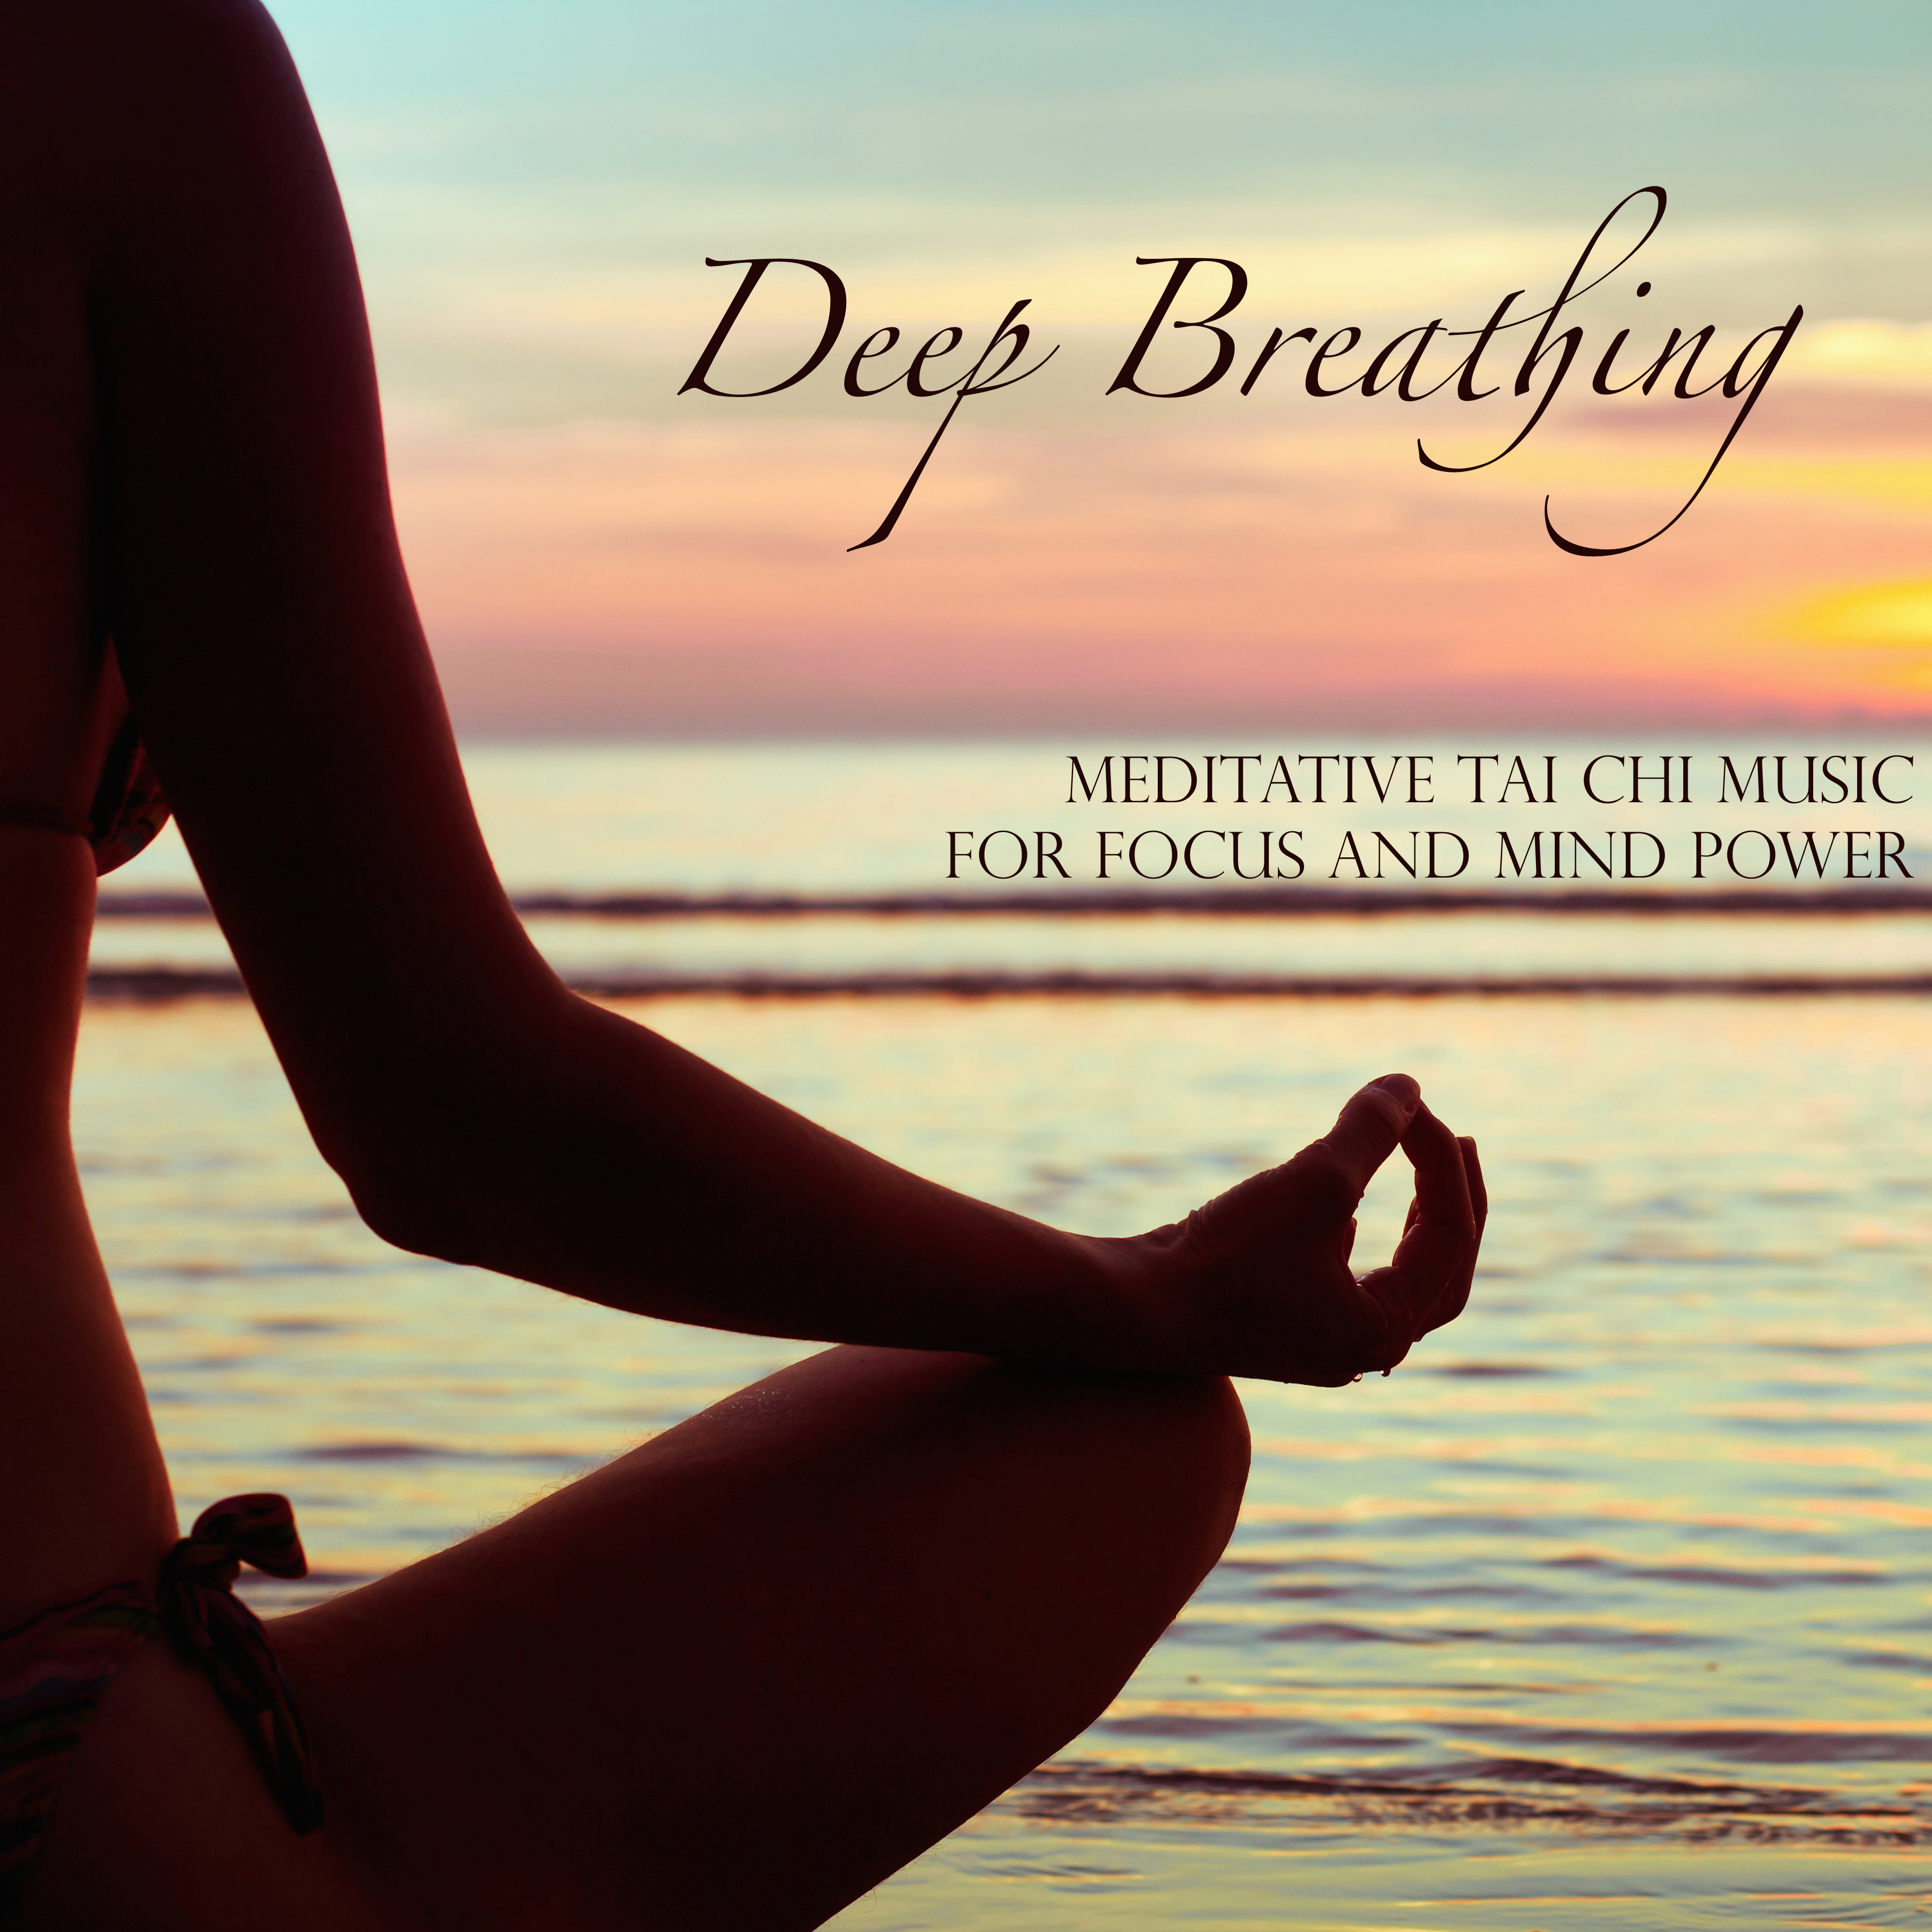 Deep Breathing - Meditative Tai Chi Music for Focus and Mind Power